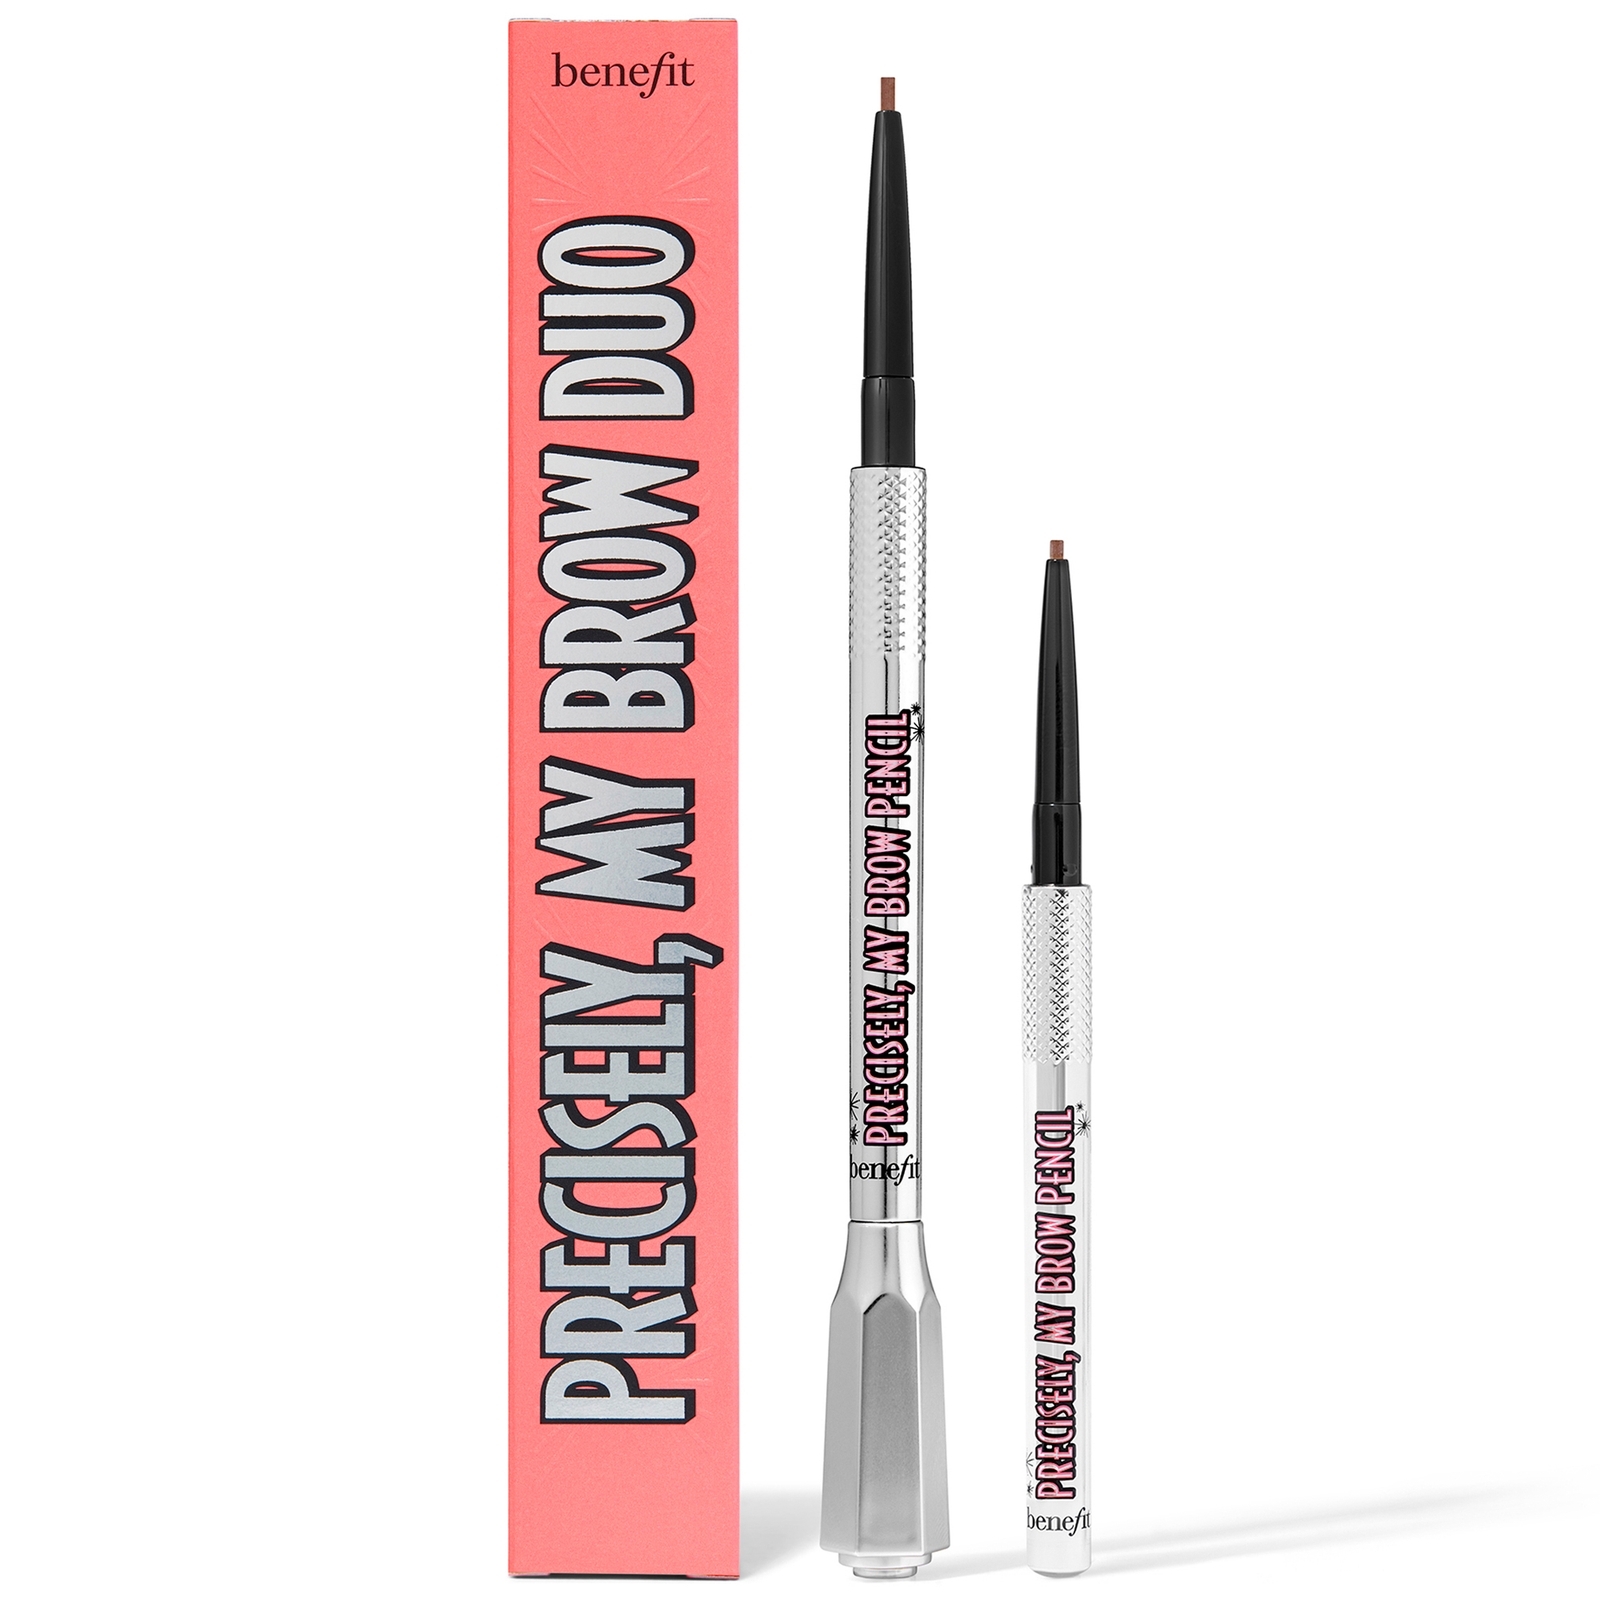 benefit The Precise Pair Precisely My Brow Pencil Duo Set (Various Shades) - 3.5 Neutral Medium Brow